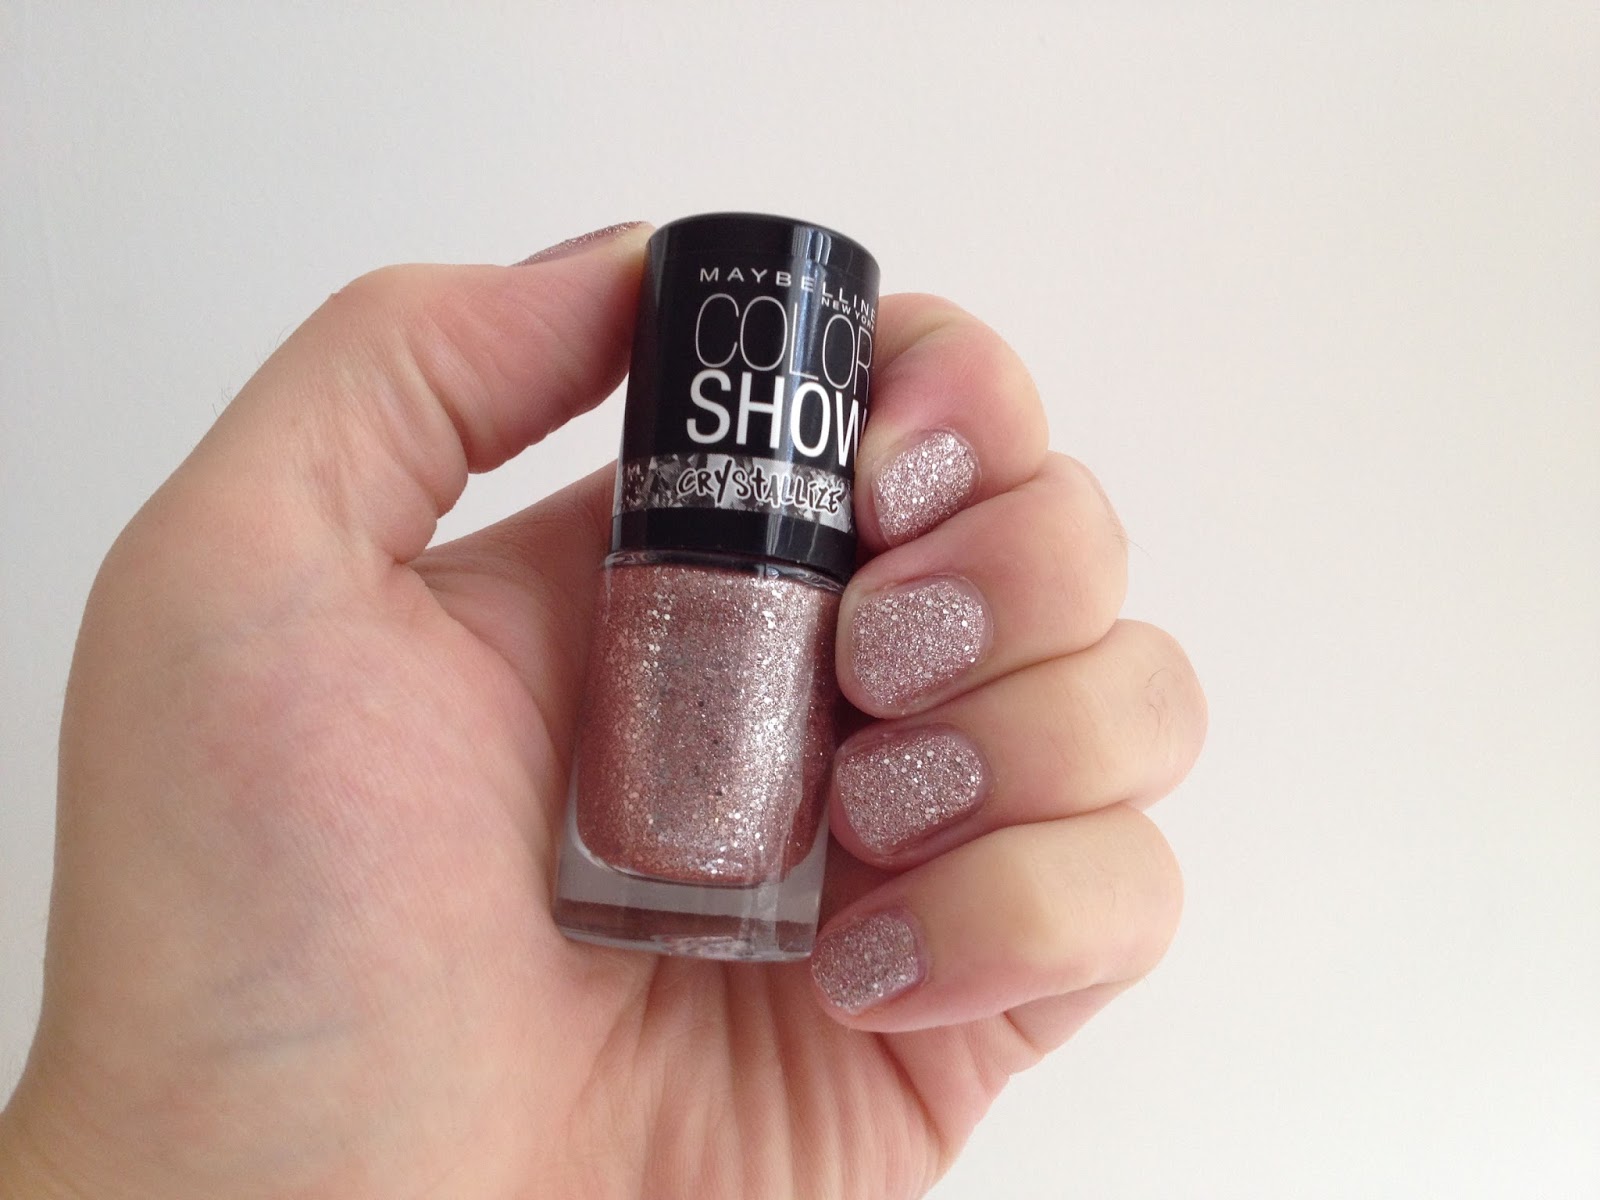 Maybelline Color Show Nail Polish Pearl Gem Swatch - wide 4